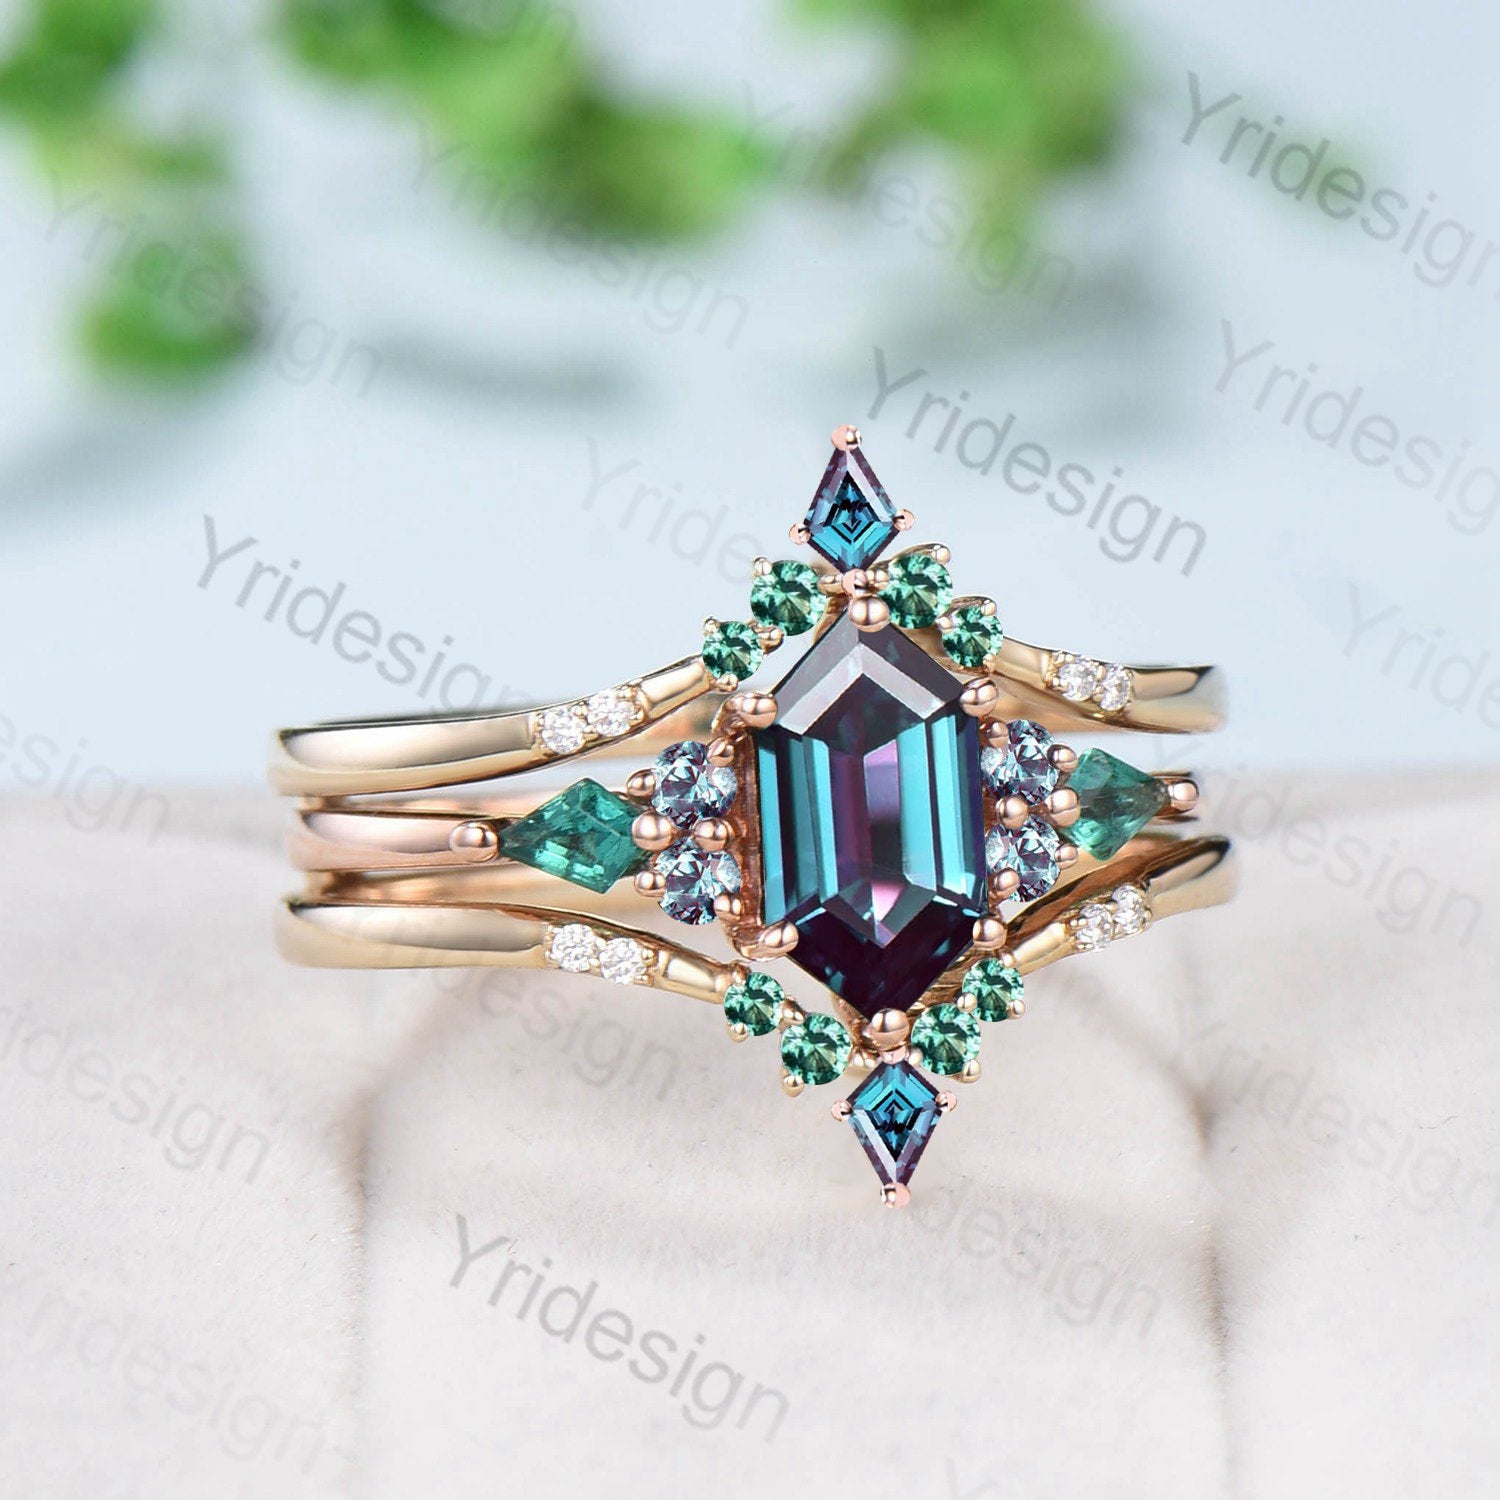 Vintage 5X9mm long hexagon alexandrite engagement ring set   kite alexandrite emerald green stone wedding set double curved v stacking band - PENFINE